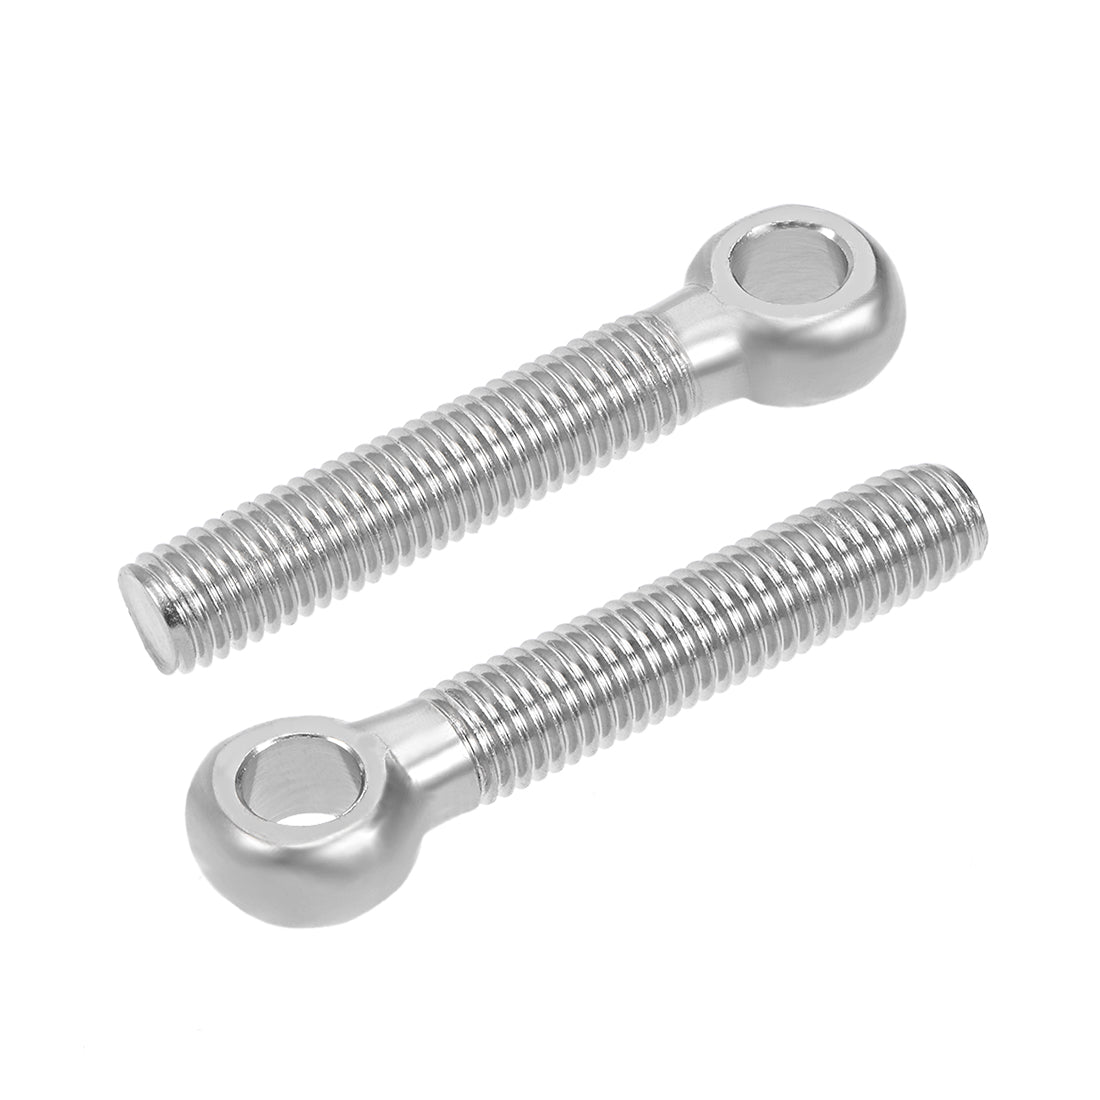 Uxcell Uxcell M5 x 25mm 304 Stainless Steel Machine Shoulder Lift Eye Bolt Rigging 10pcs